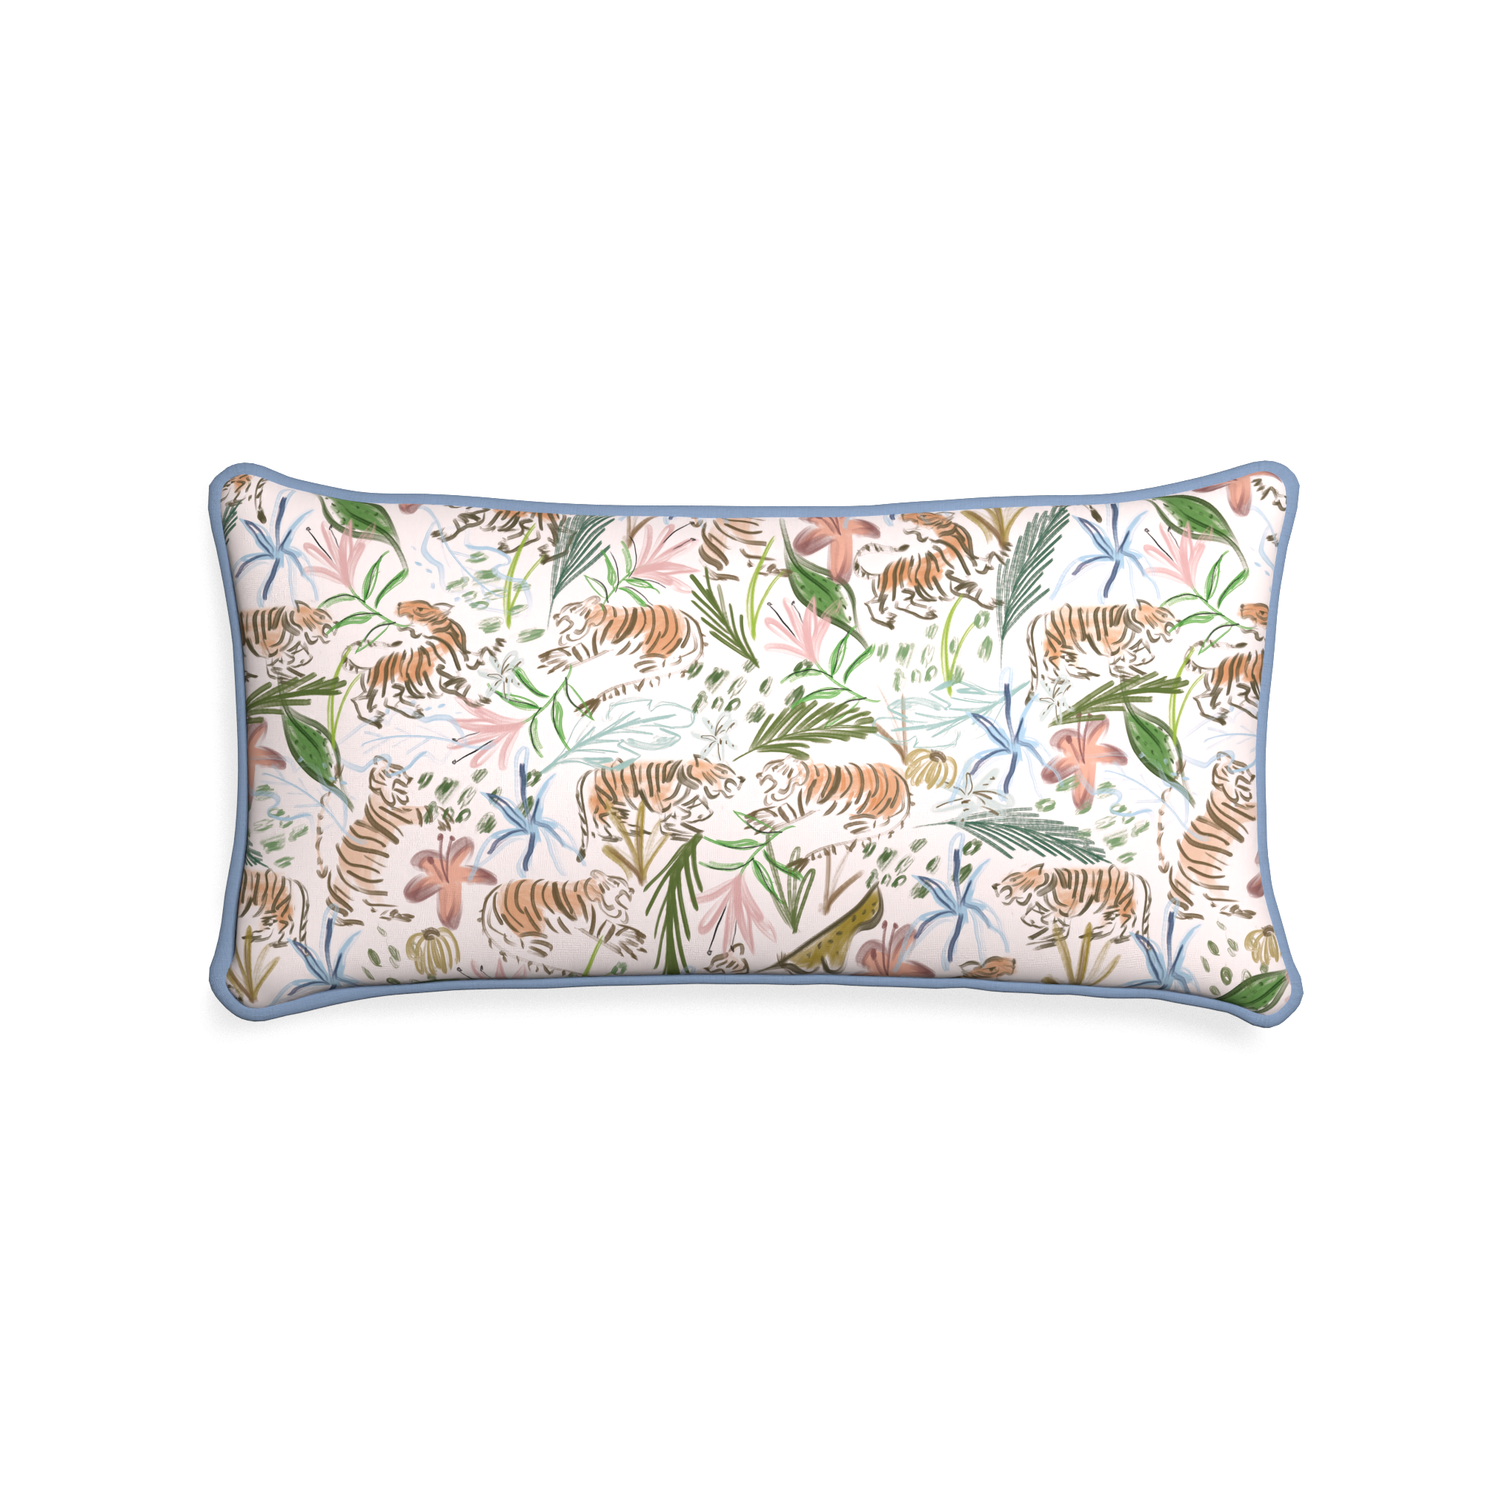 Midi-lumbar frida pink custom pink chinoiserie tigerpillow with sky piping on white background